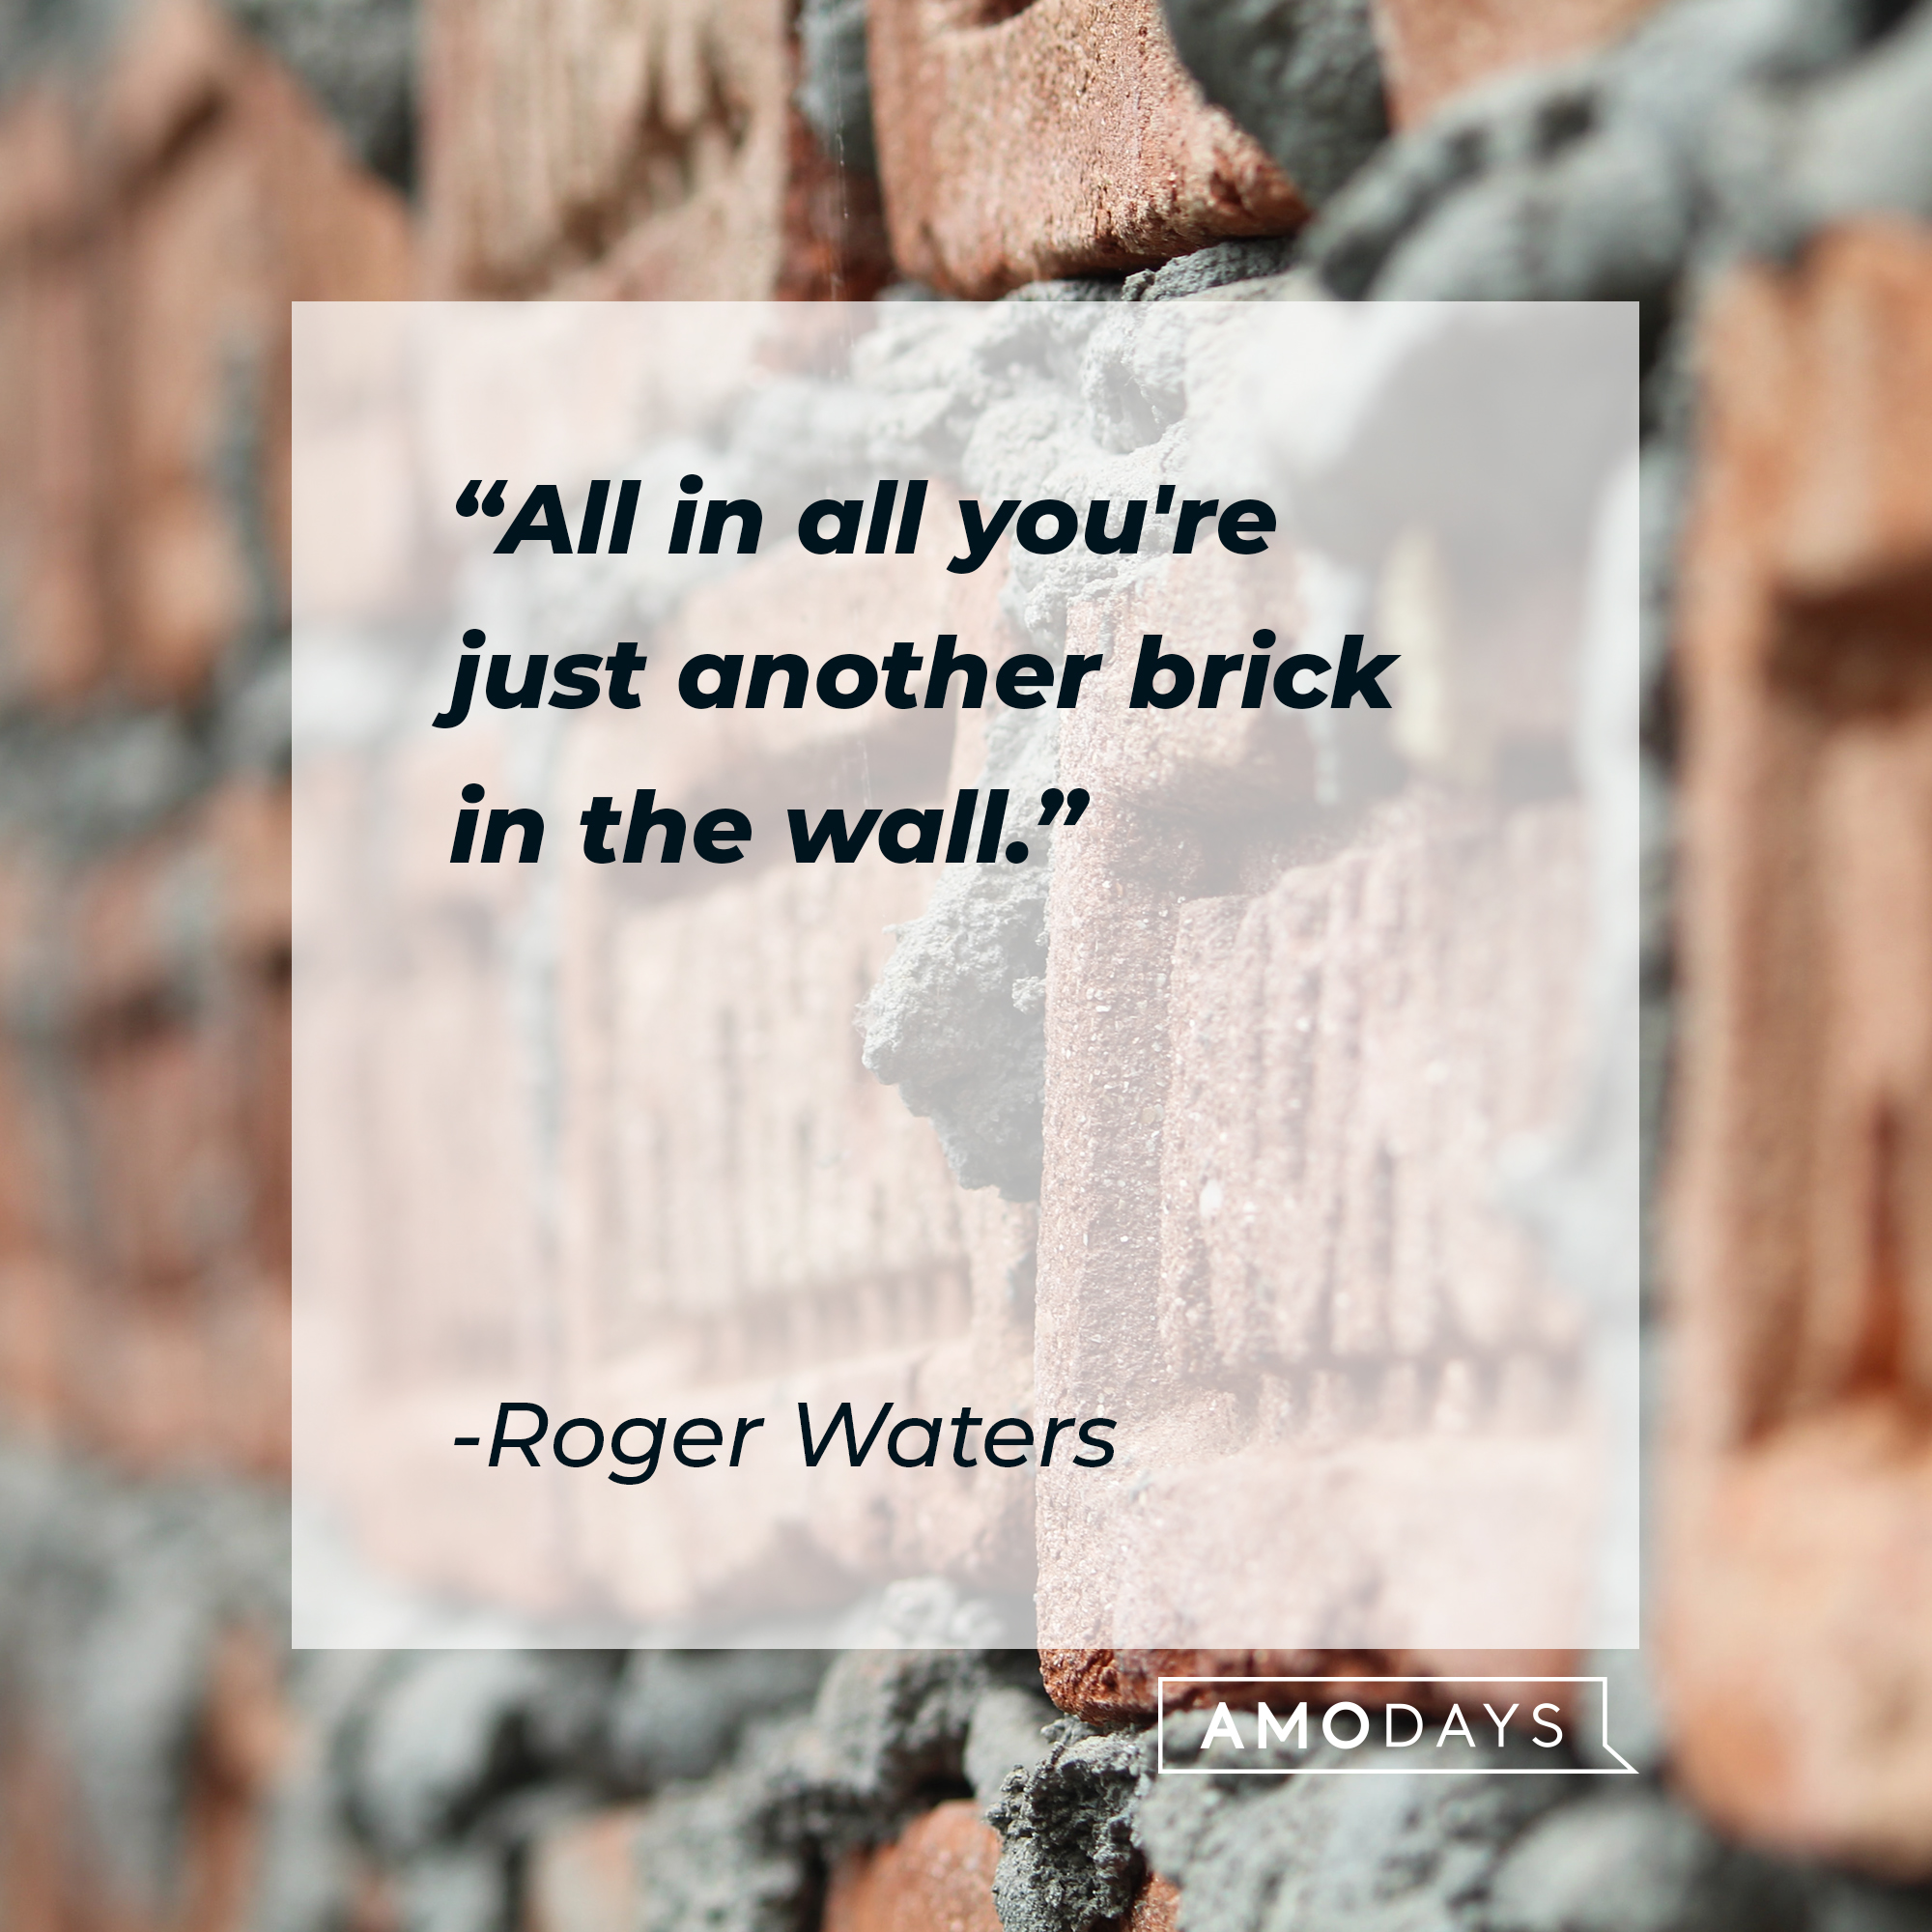 Roger Waters' quote: "All in all you're just another brick in the wall." | Source: Unsplash